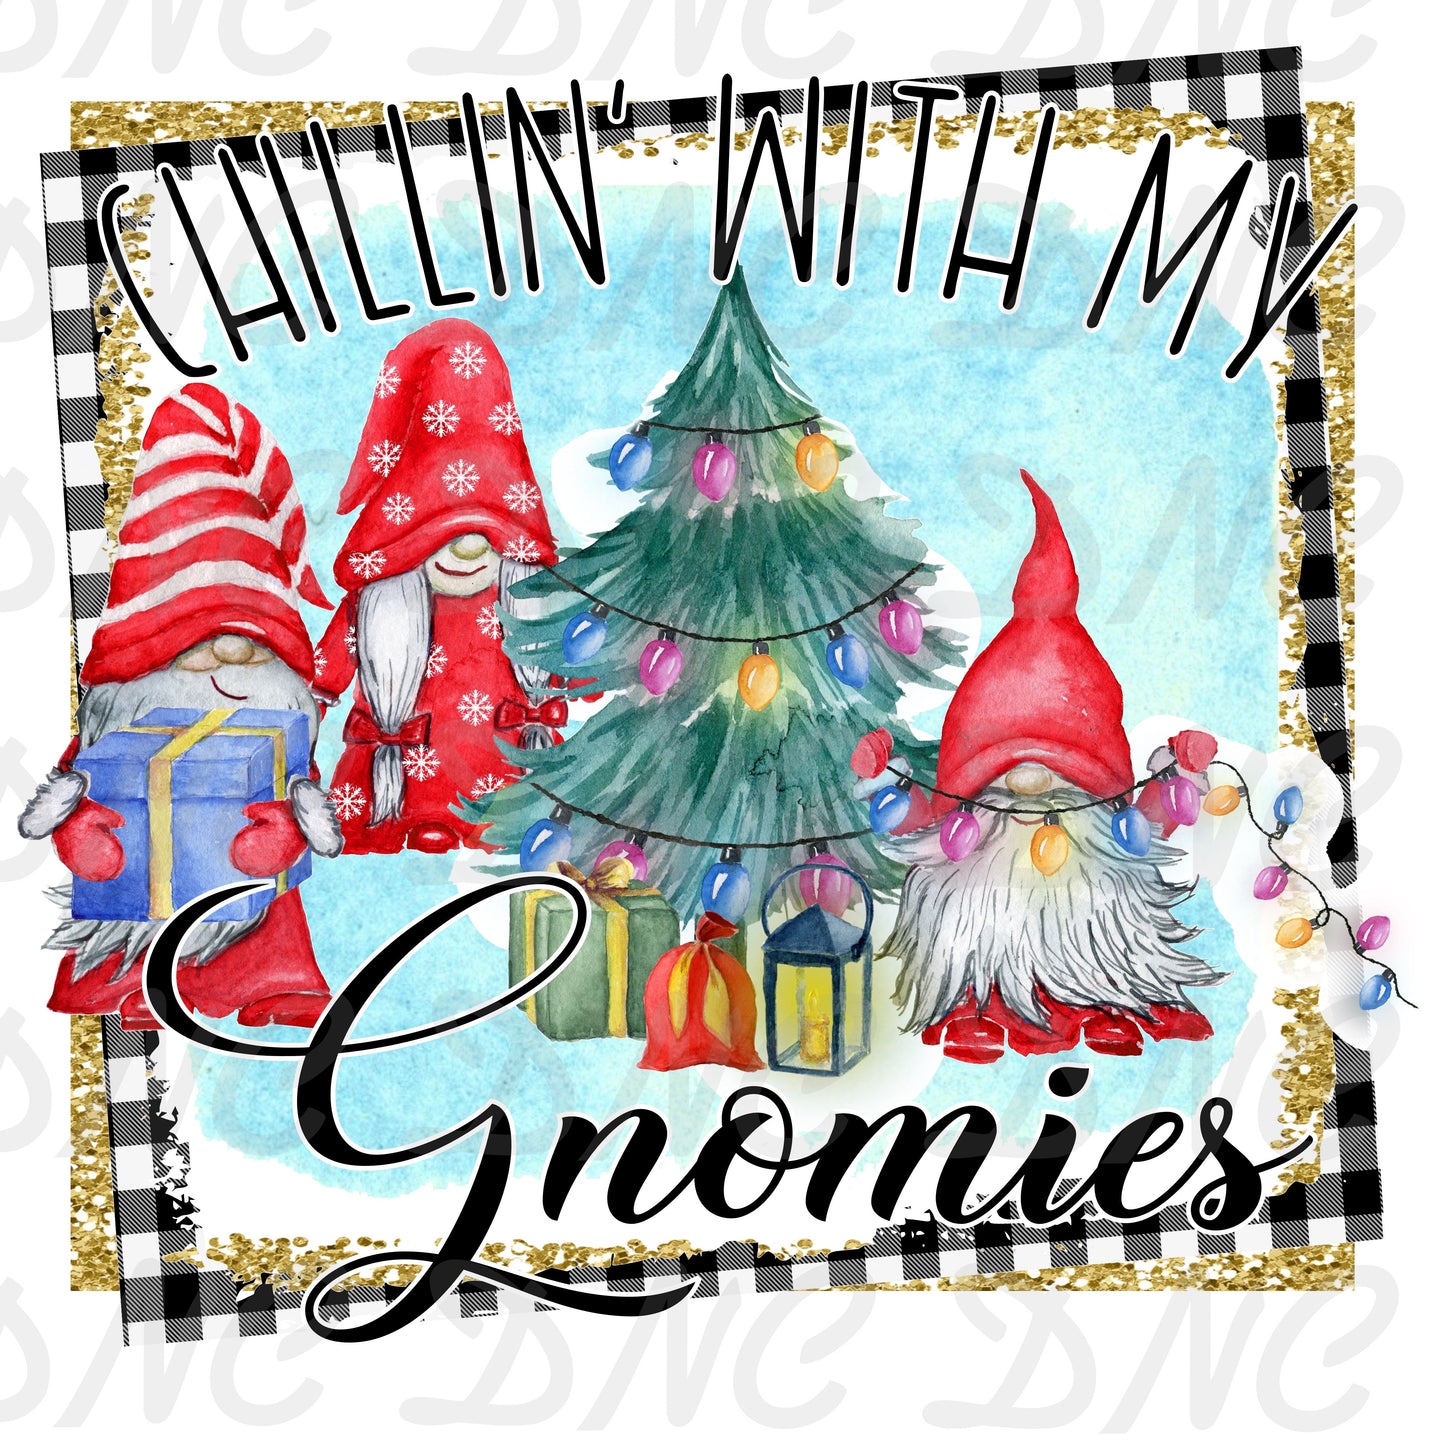 Chillin' with my gnomies  - Sublimation